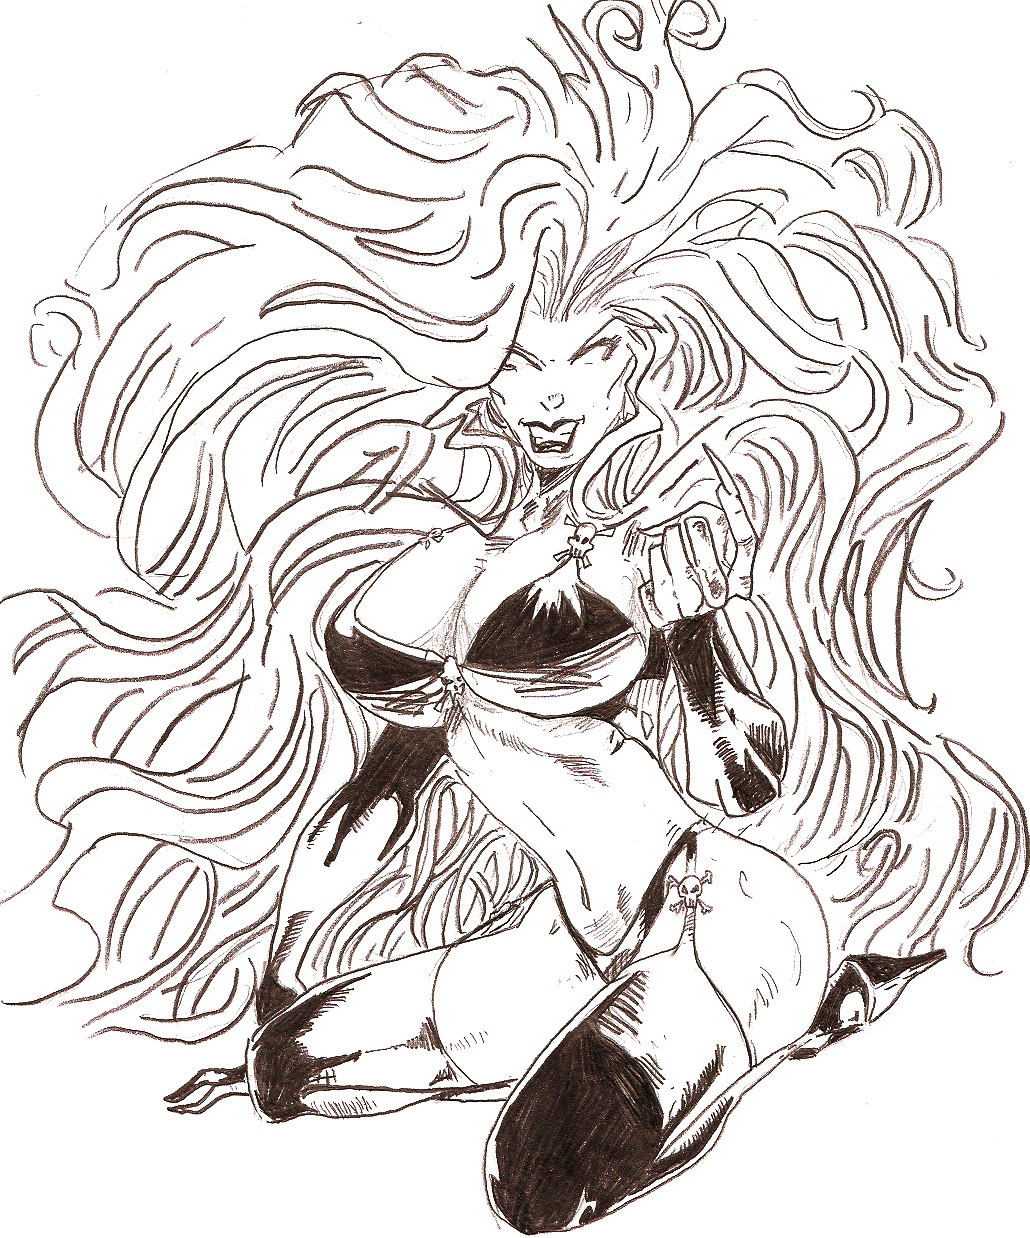 Lady Death by fortuneteller